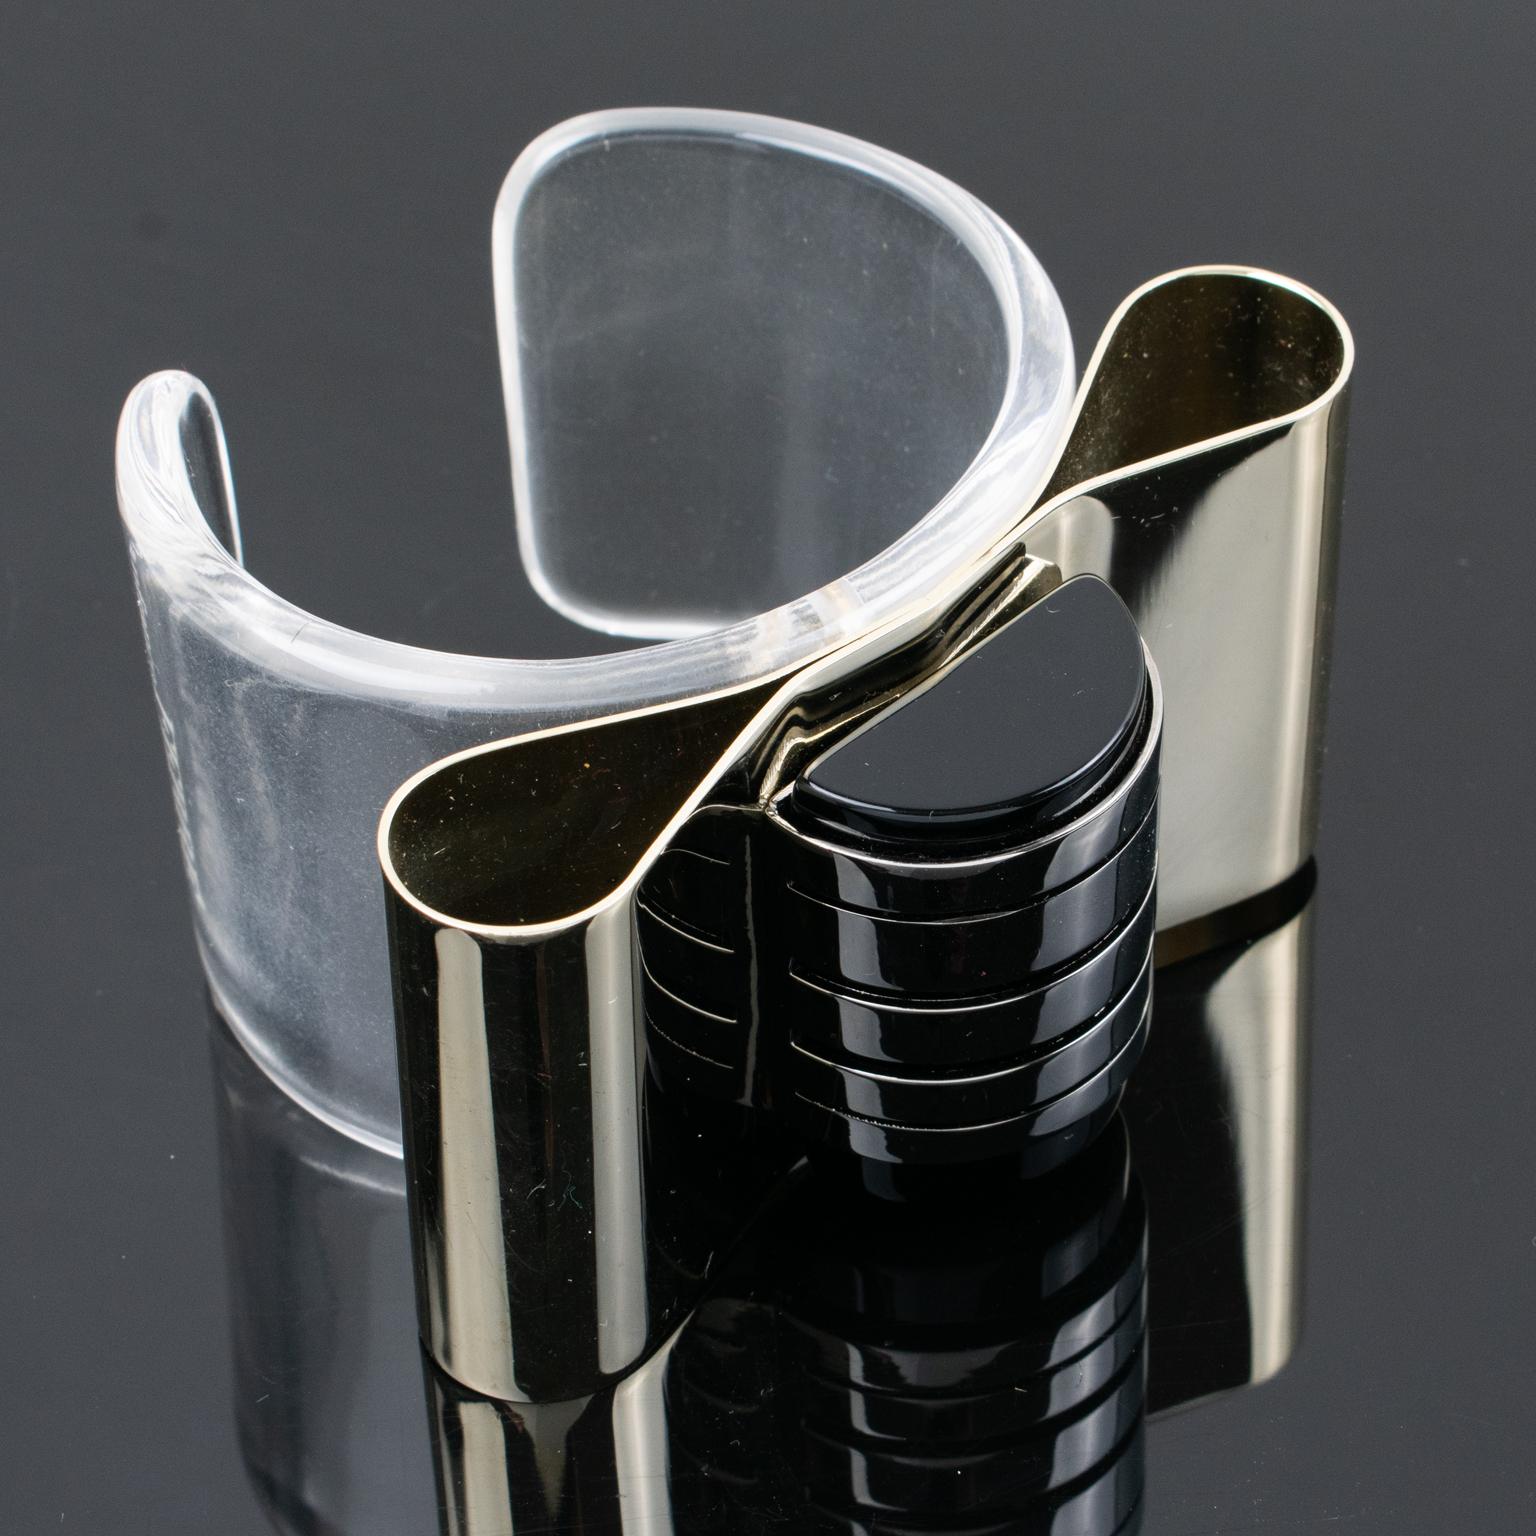 Gianfranco Ferre Art Deco Inspired Lucite and Metal Cuff Bracelet For Sale 1